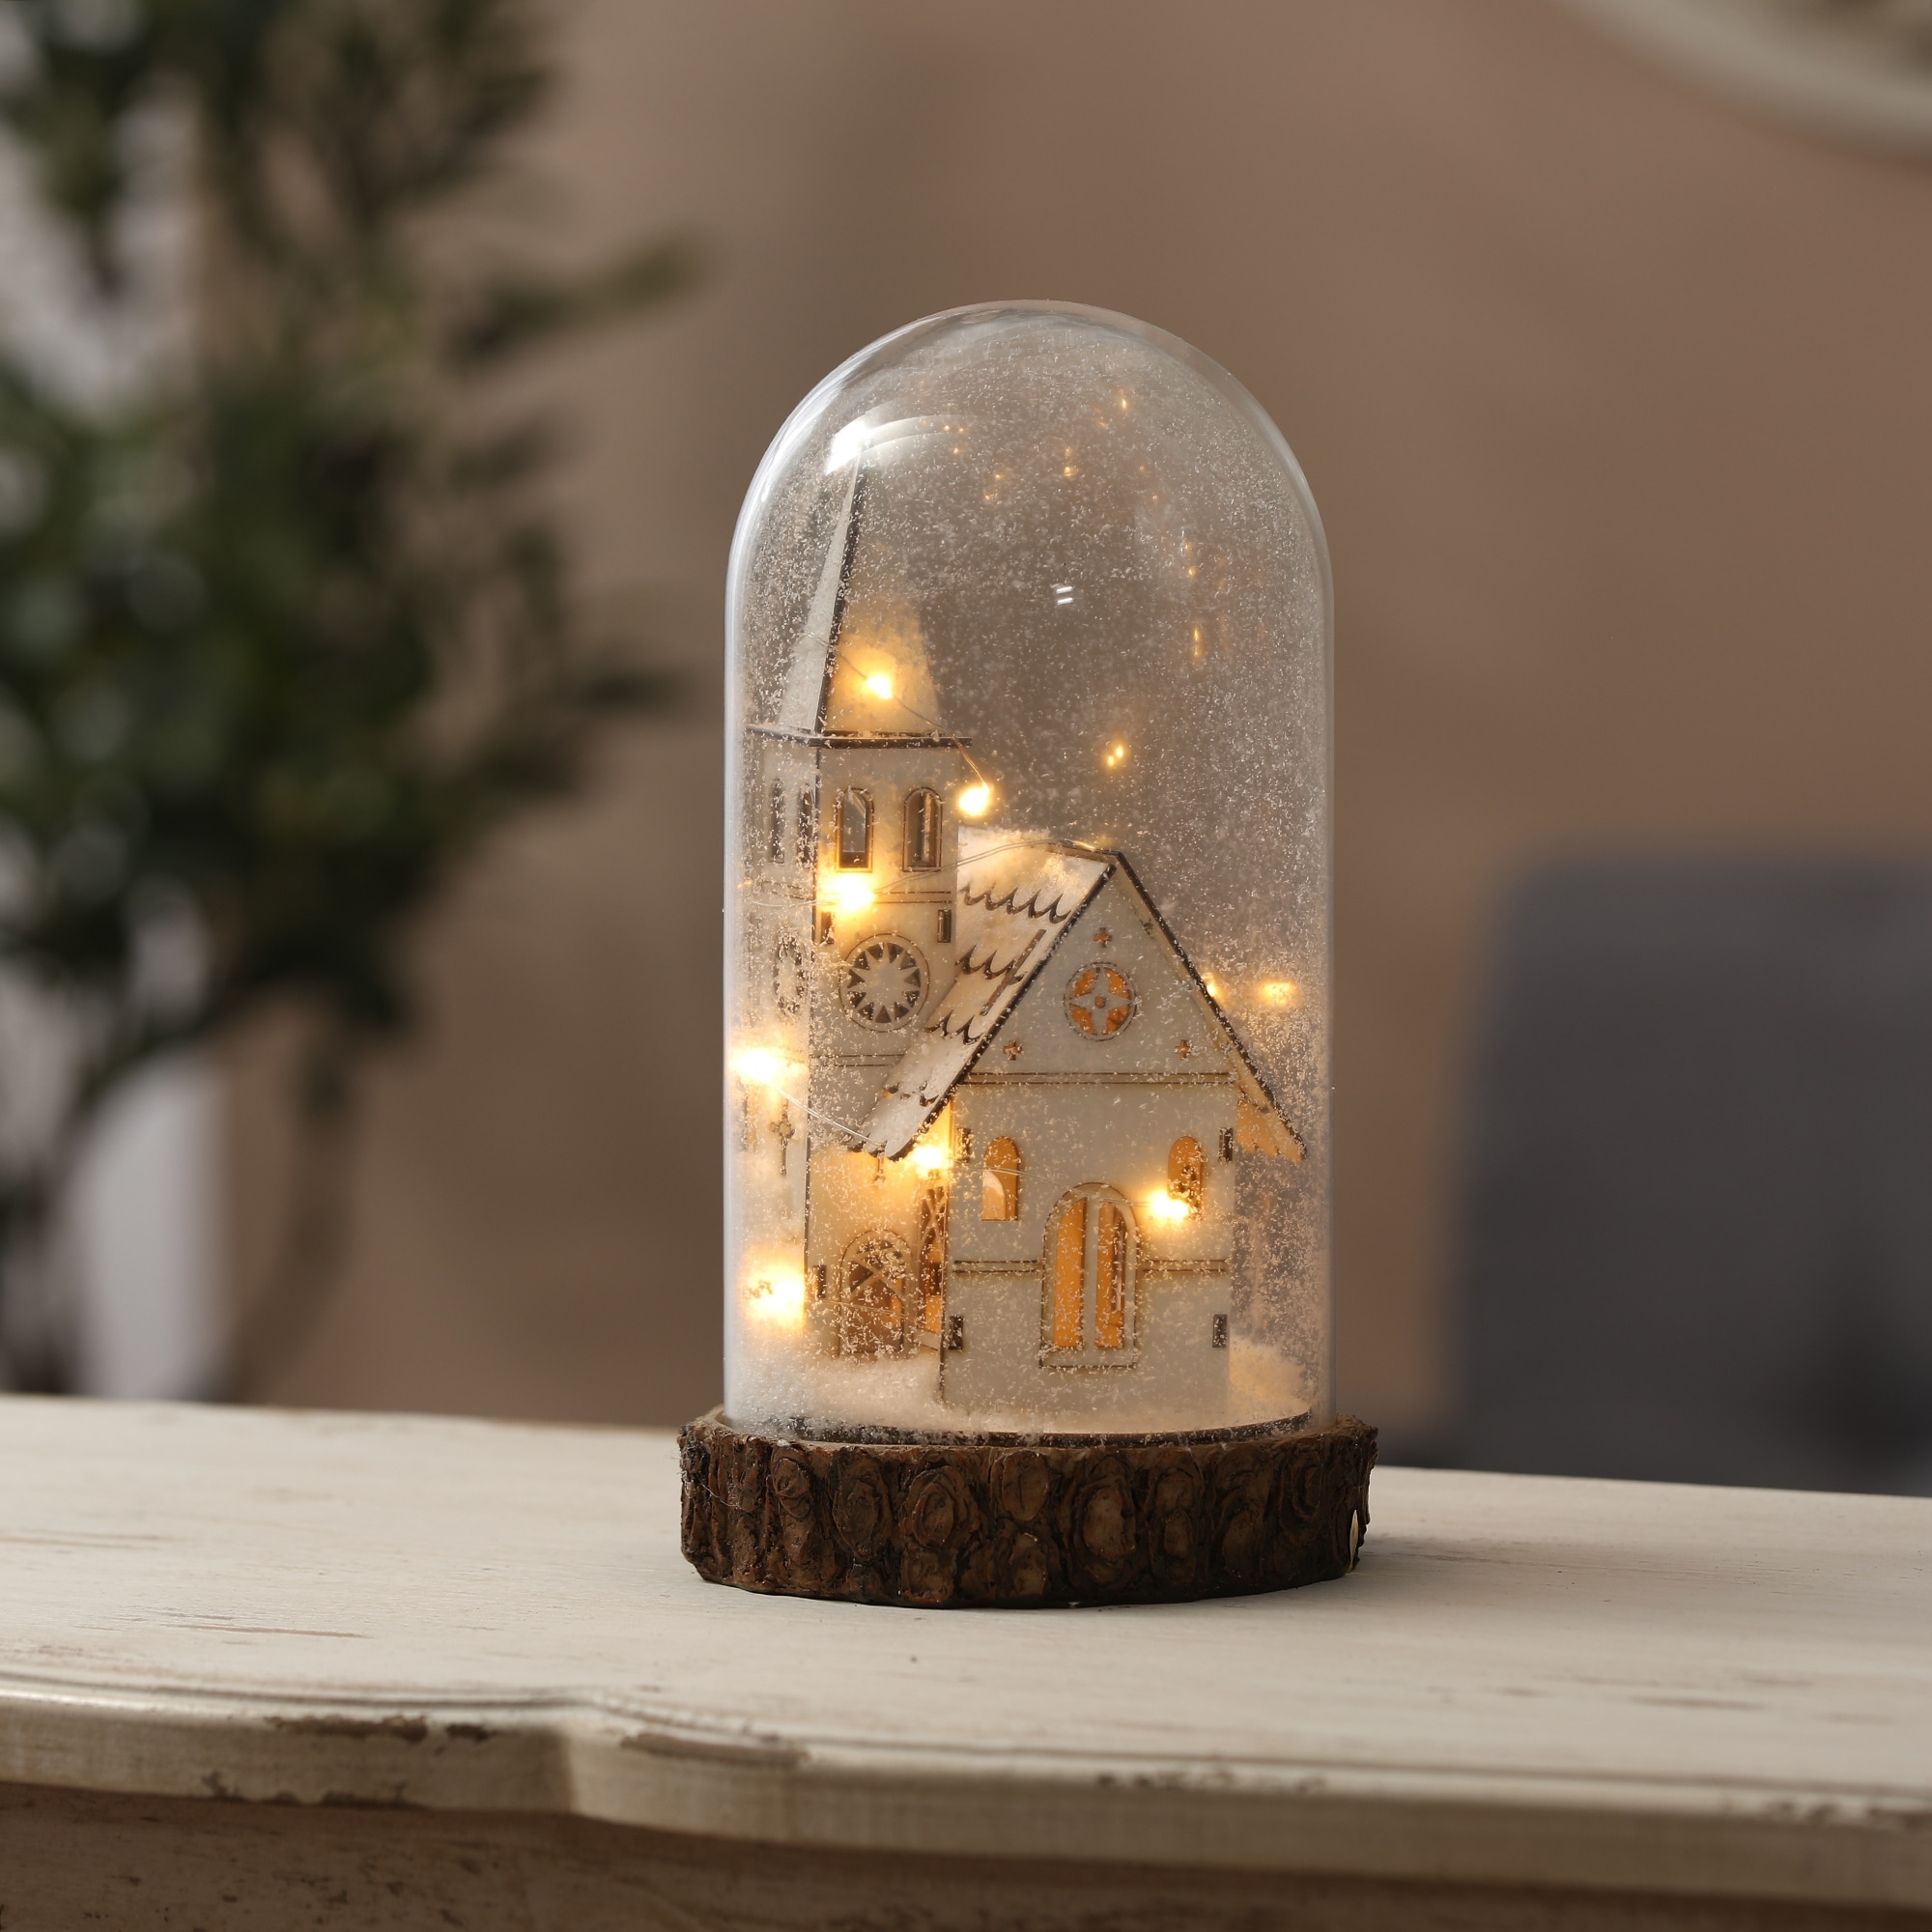 https://ak1.ostkcdn.com/images/products/is/images/direct/fc6ba418af91bf5516c686a90590f66c6f5821f2/Christmas-Snowy-White-Church-Glass-Dome-Lantern.jpg